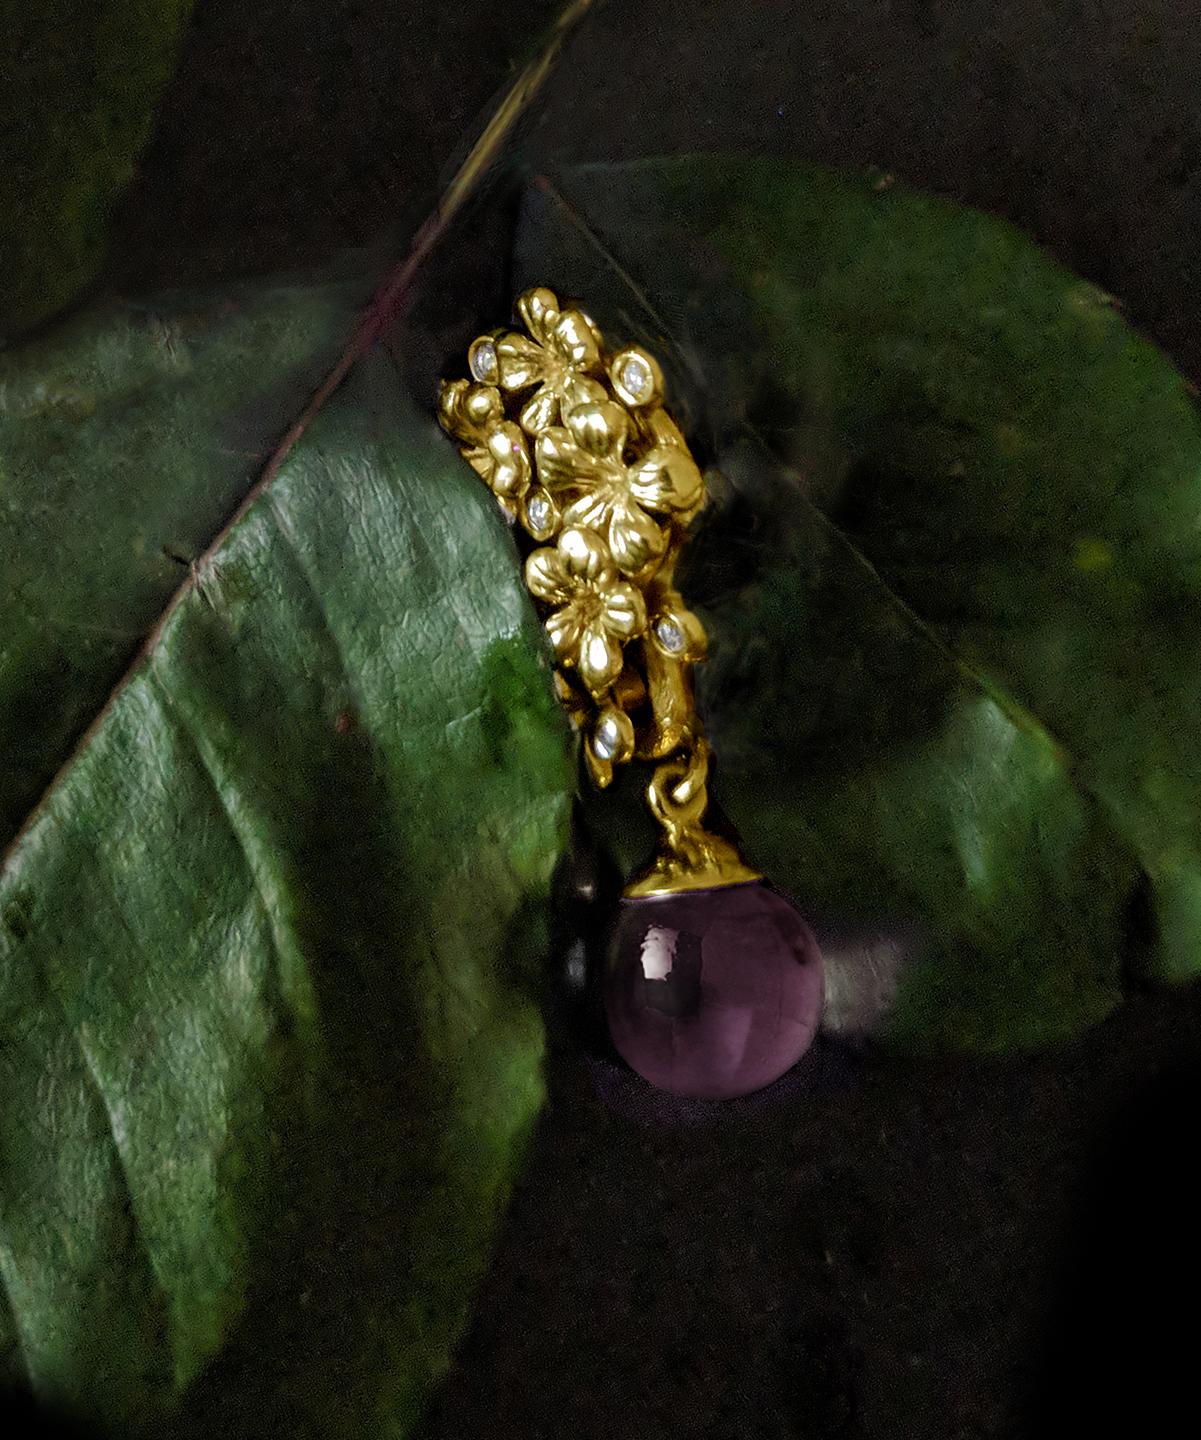 14 karat yellow gold Plum Blossom brooch encrusted with 5 round diamonds and a cabochon rose quartz. This contemporary jewellery collection has been featured in Vogue UA review. We use top natural diamonds VS, F-G, and work with a German gems